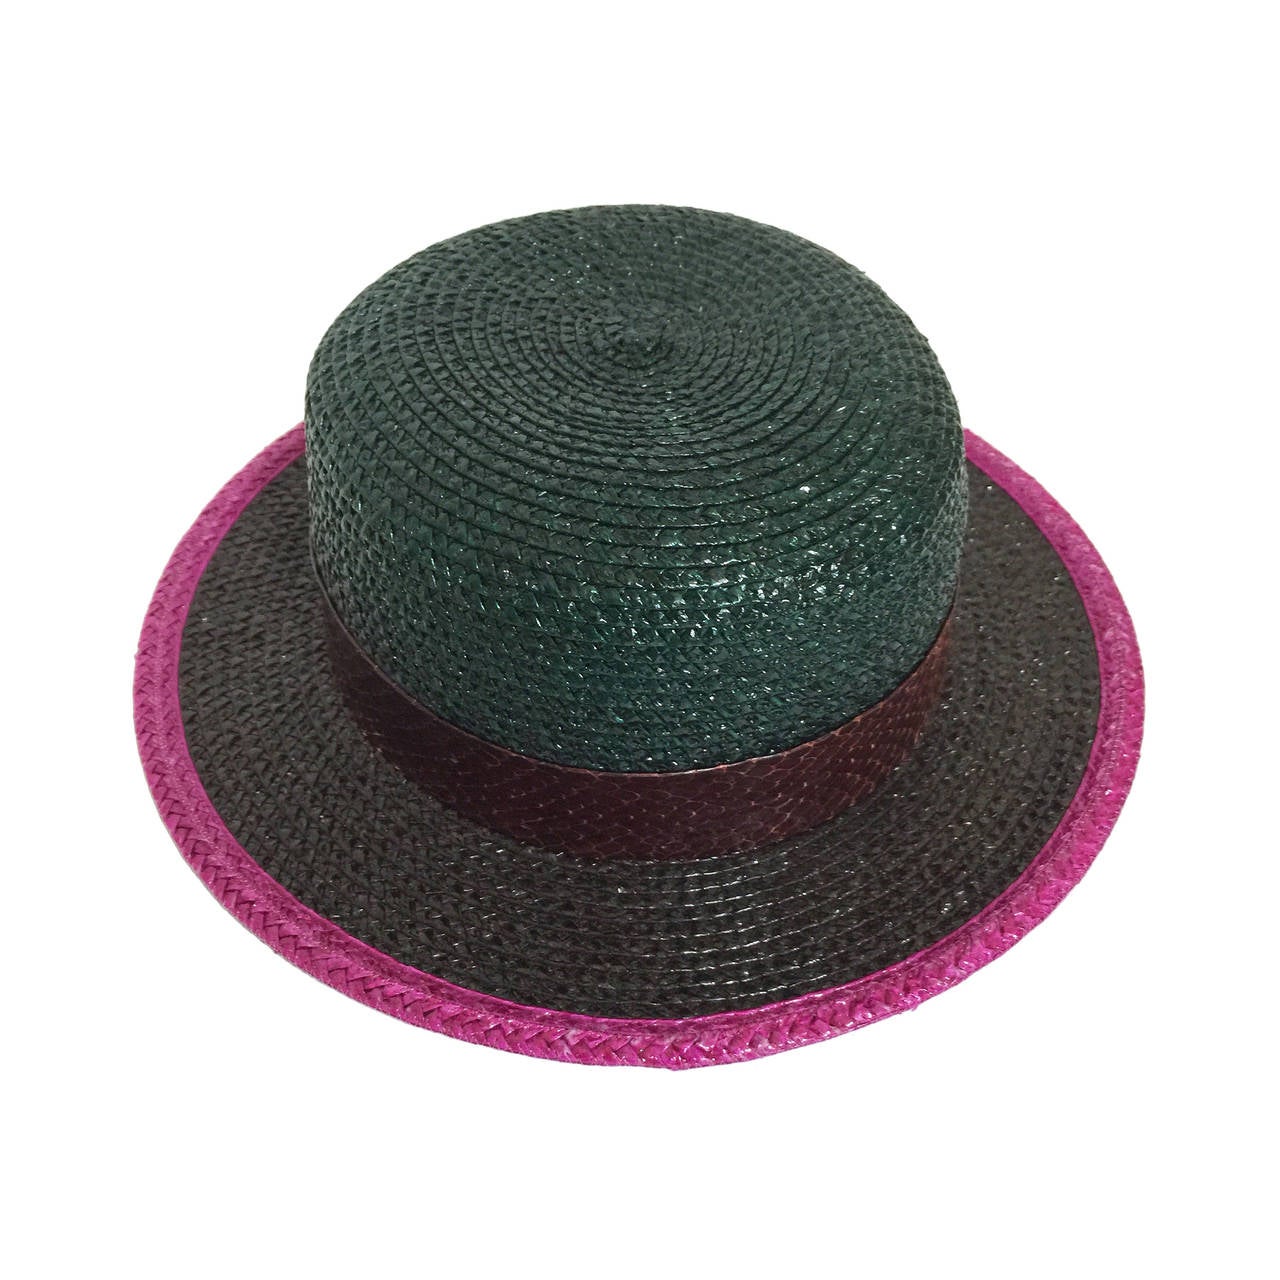 Vintage Yves Saint Laurent Runway Hat
Color blocked Glazed Raffia woven hat, trimmed with burgundy snakeskin.
Size: 57
Fits head size small to medium.
Excellent condition.